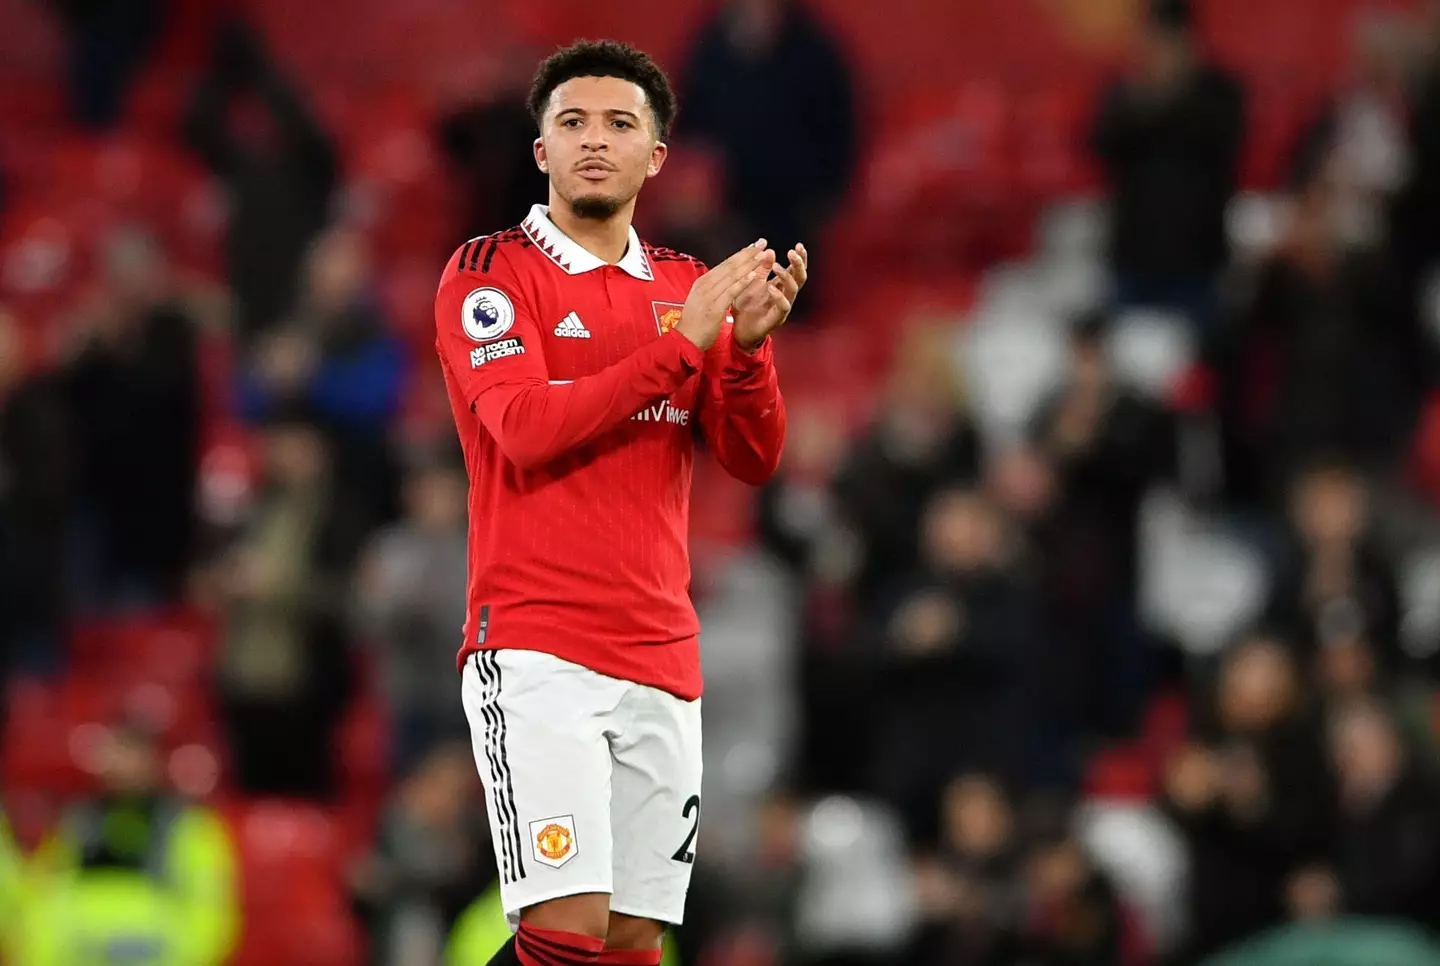 Sancho has a new role at Old Trafford. (Image